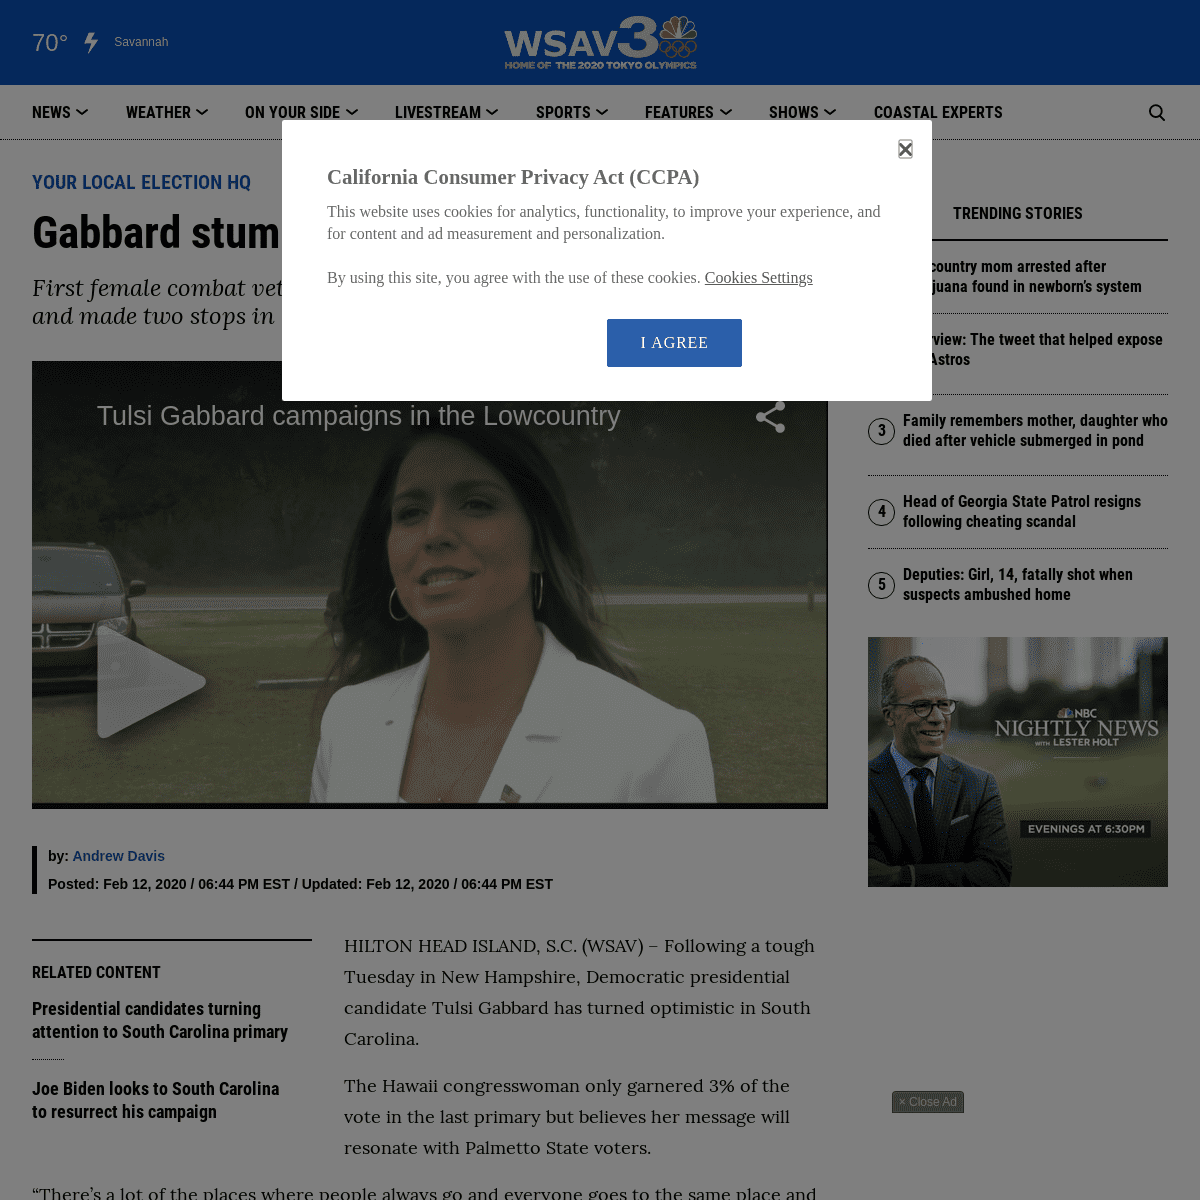 A complete backup of www.wsav.com/news/your-local-election-hq/tulsi-gabbard-stumps-for-votes-in-the-lowcountry/